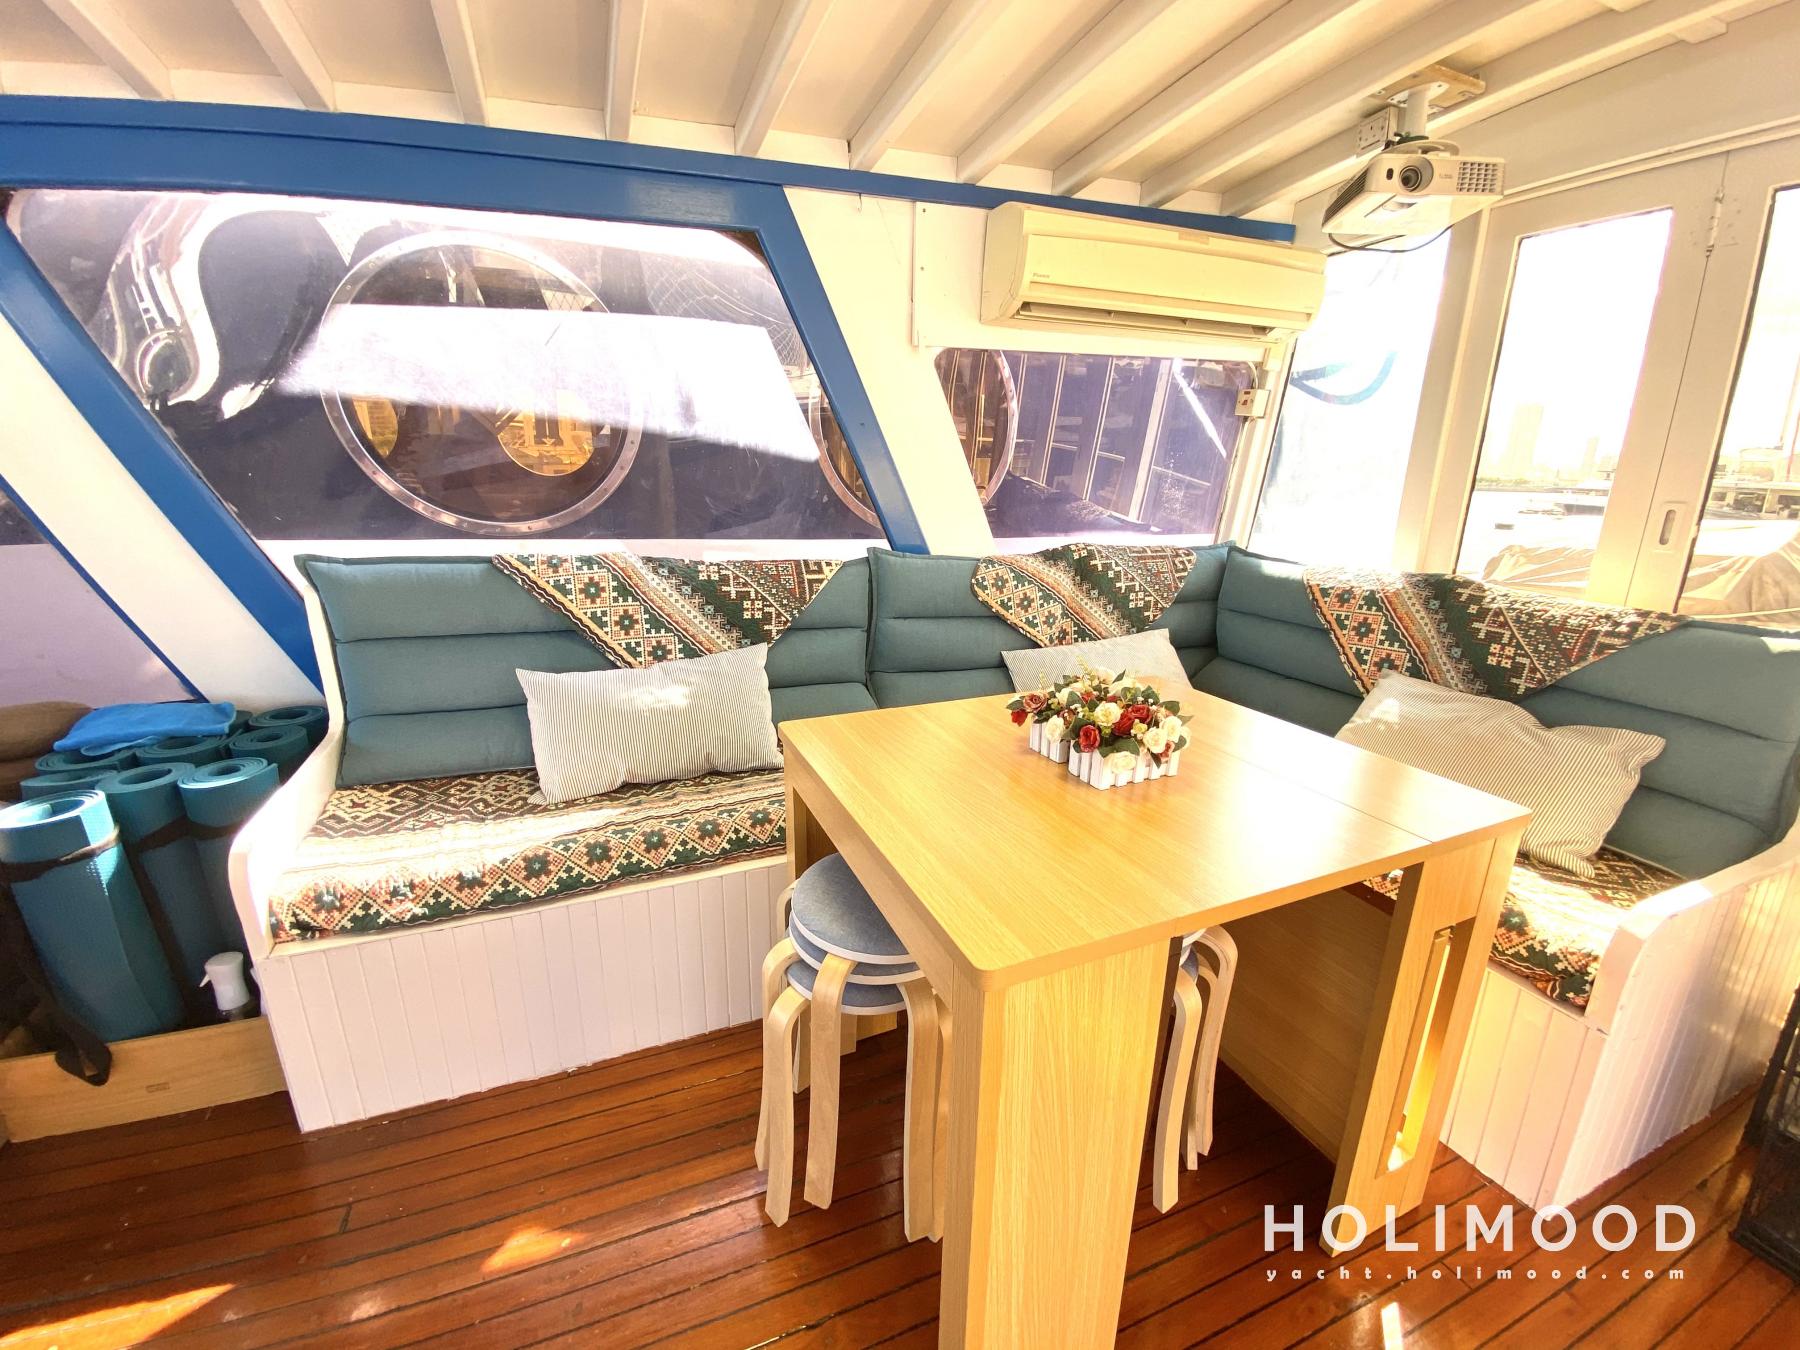 JR02 Kwun Tong 8-Hour Houseboat Party Room Pkg. (Board Game & Shuttle) 5